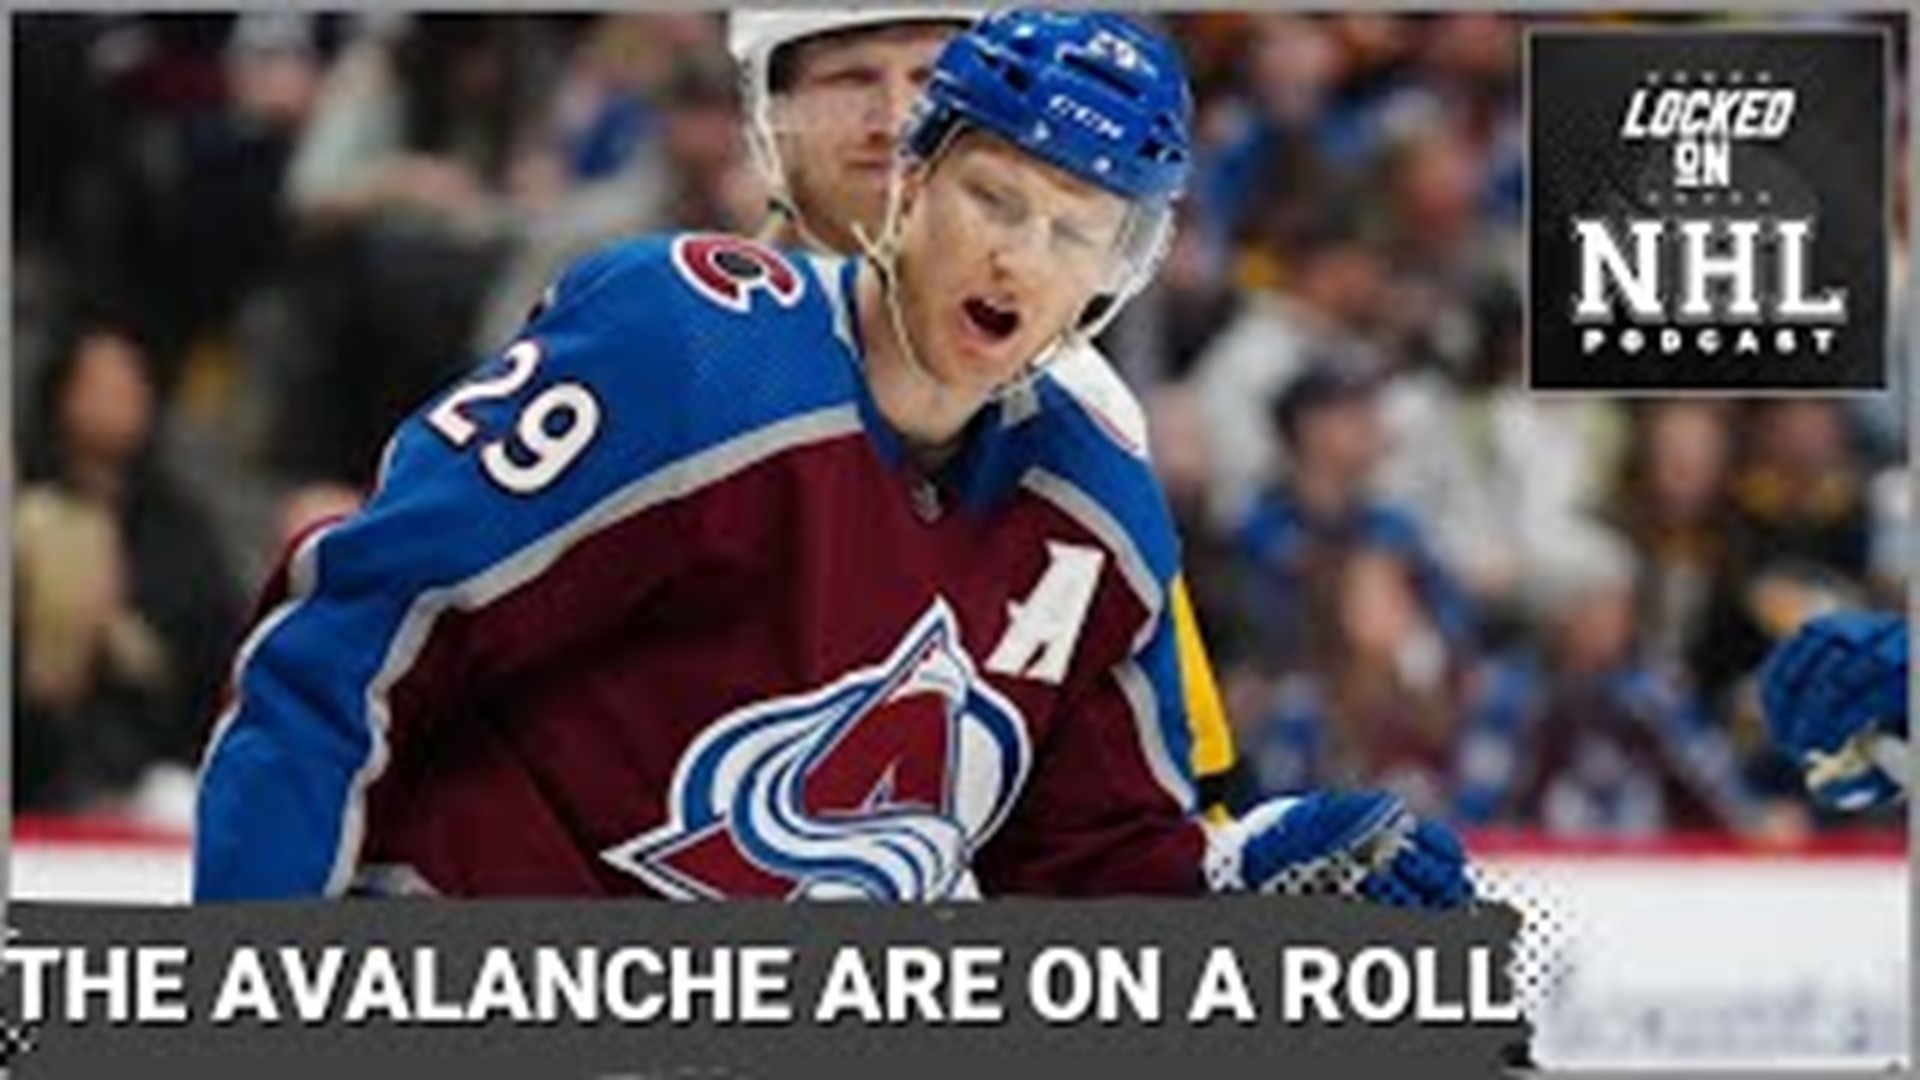 The Colorado Avalanche are on a nine-game winning streak including a comeback from a 4-0 deficit Sunday against the Pittsburgh Penguins.